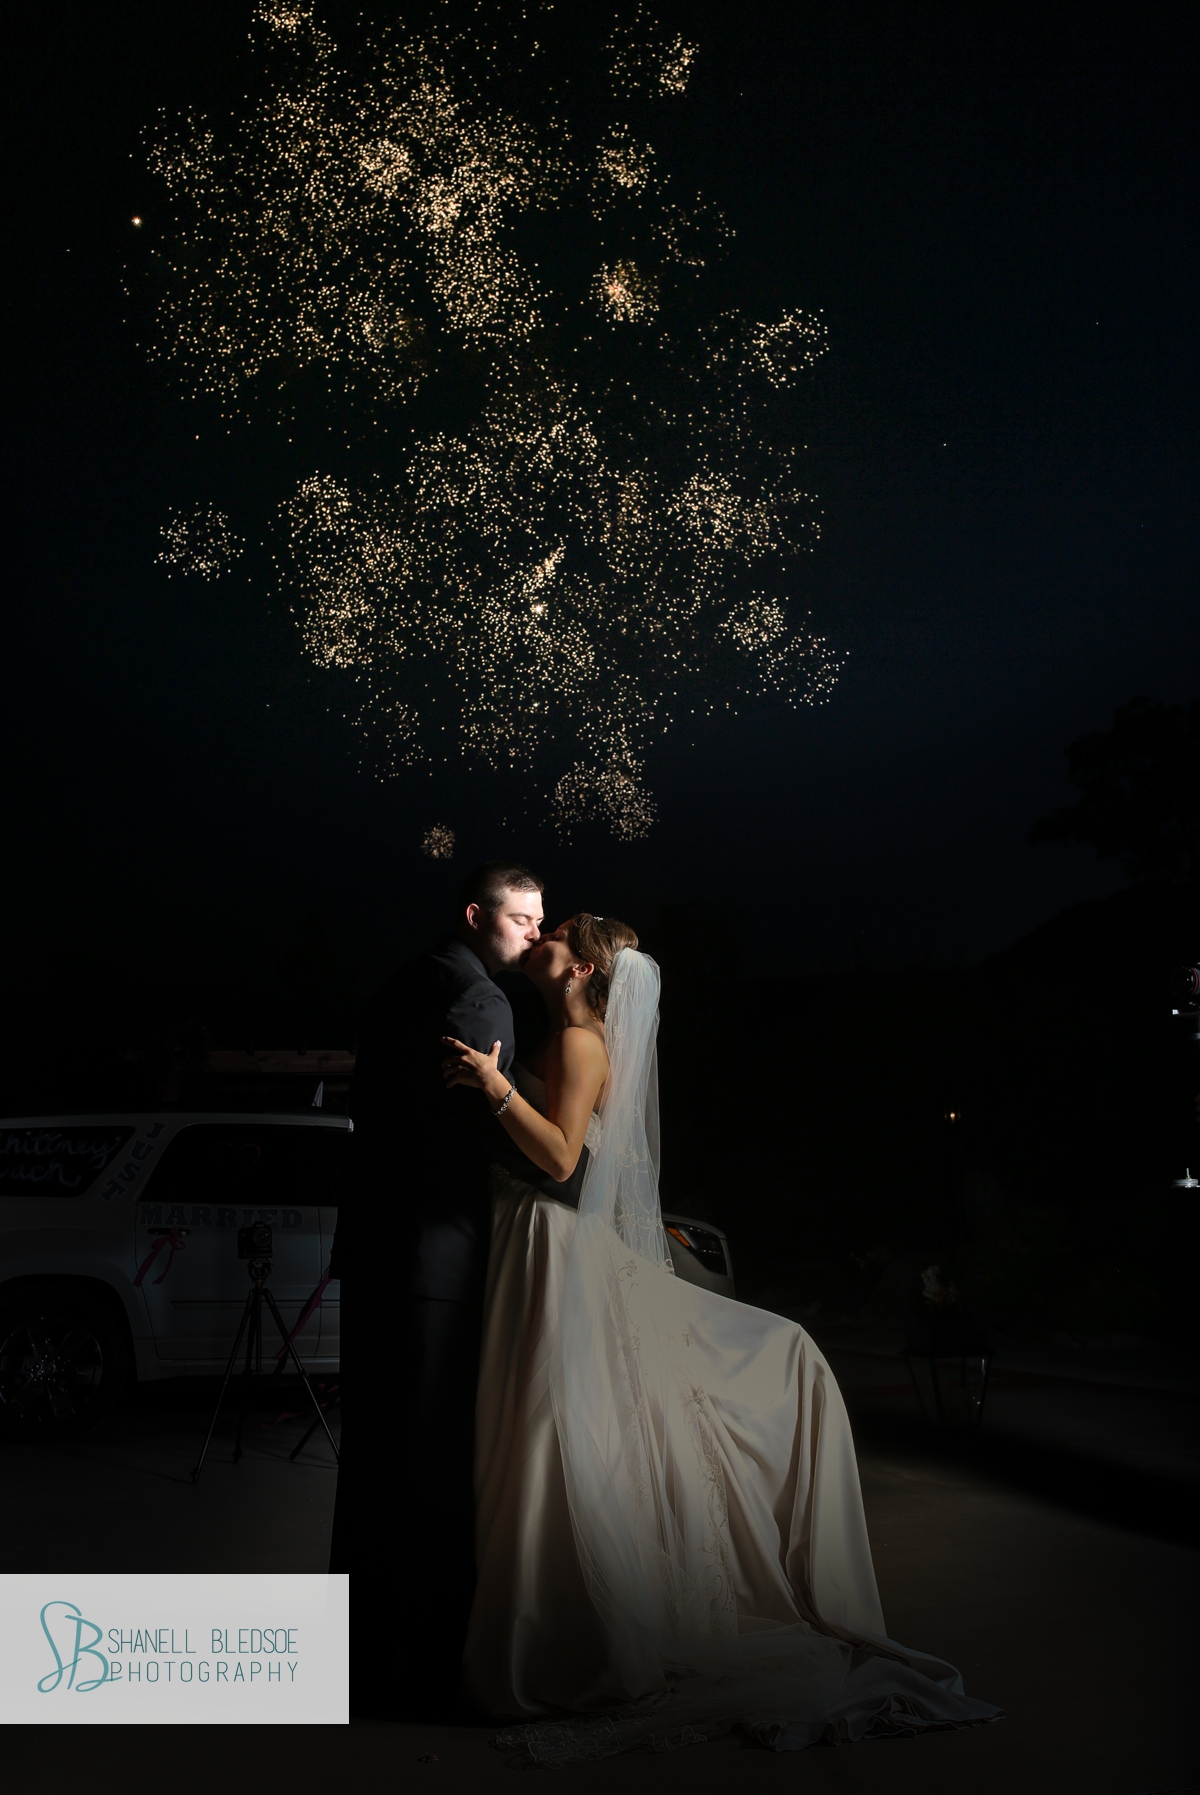 Bride and groom kiss in front of fireworks after wedding reception at the stables in lafollette tn